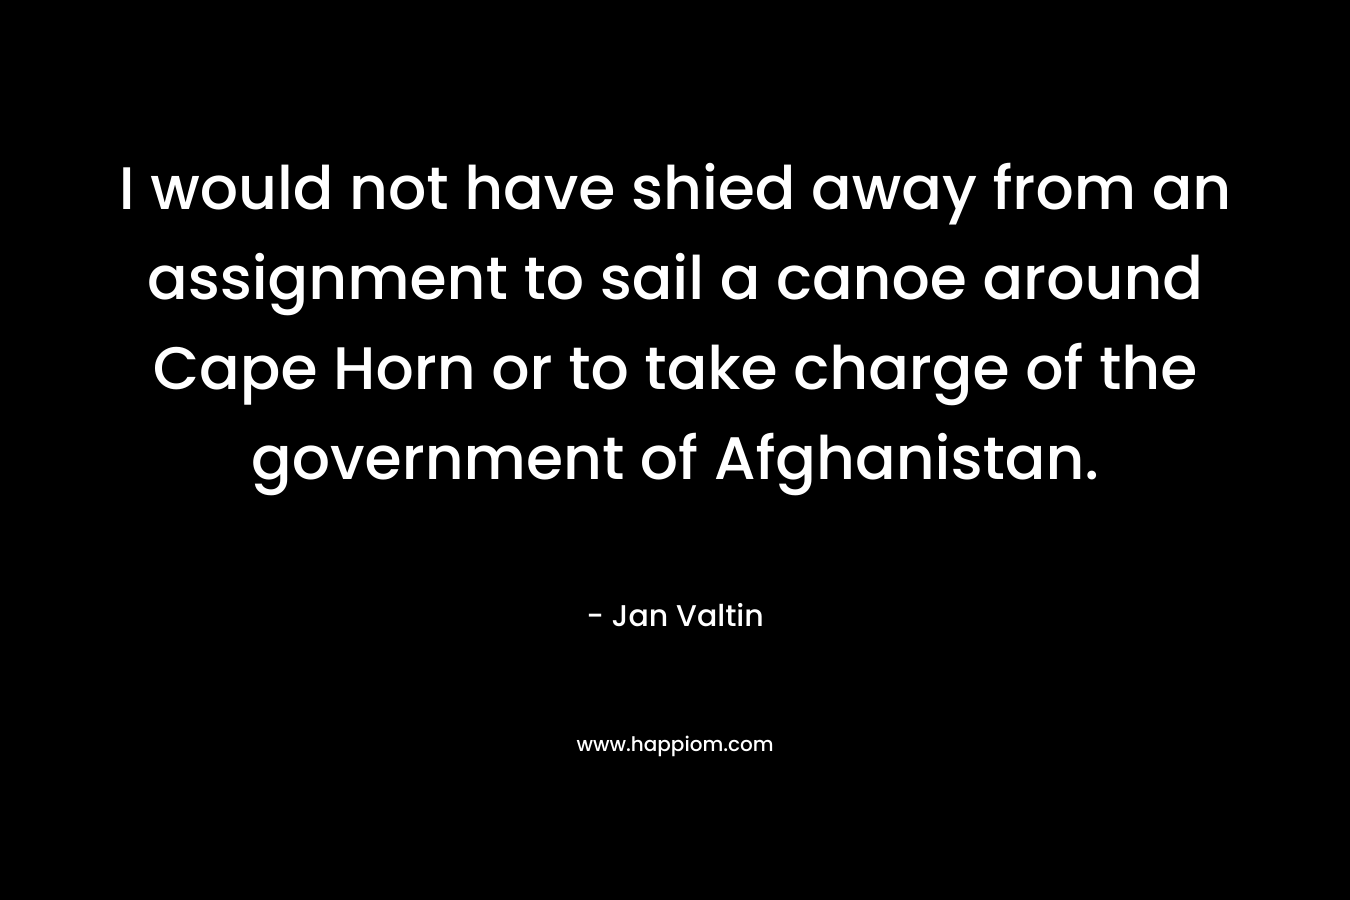 I would not have shied away from an assignment to sail a canoe around Cape Horn or to take charge of the government of Afghanistan. – Jan Valtin